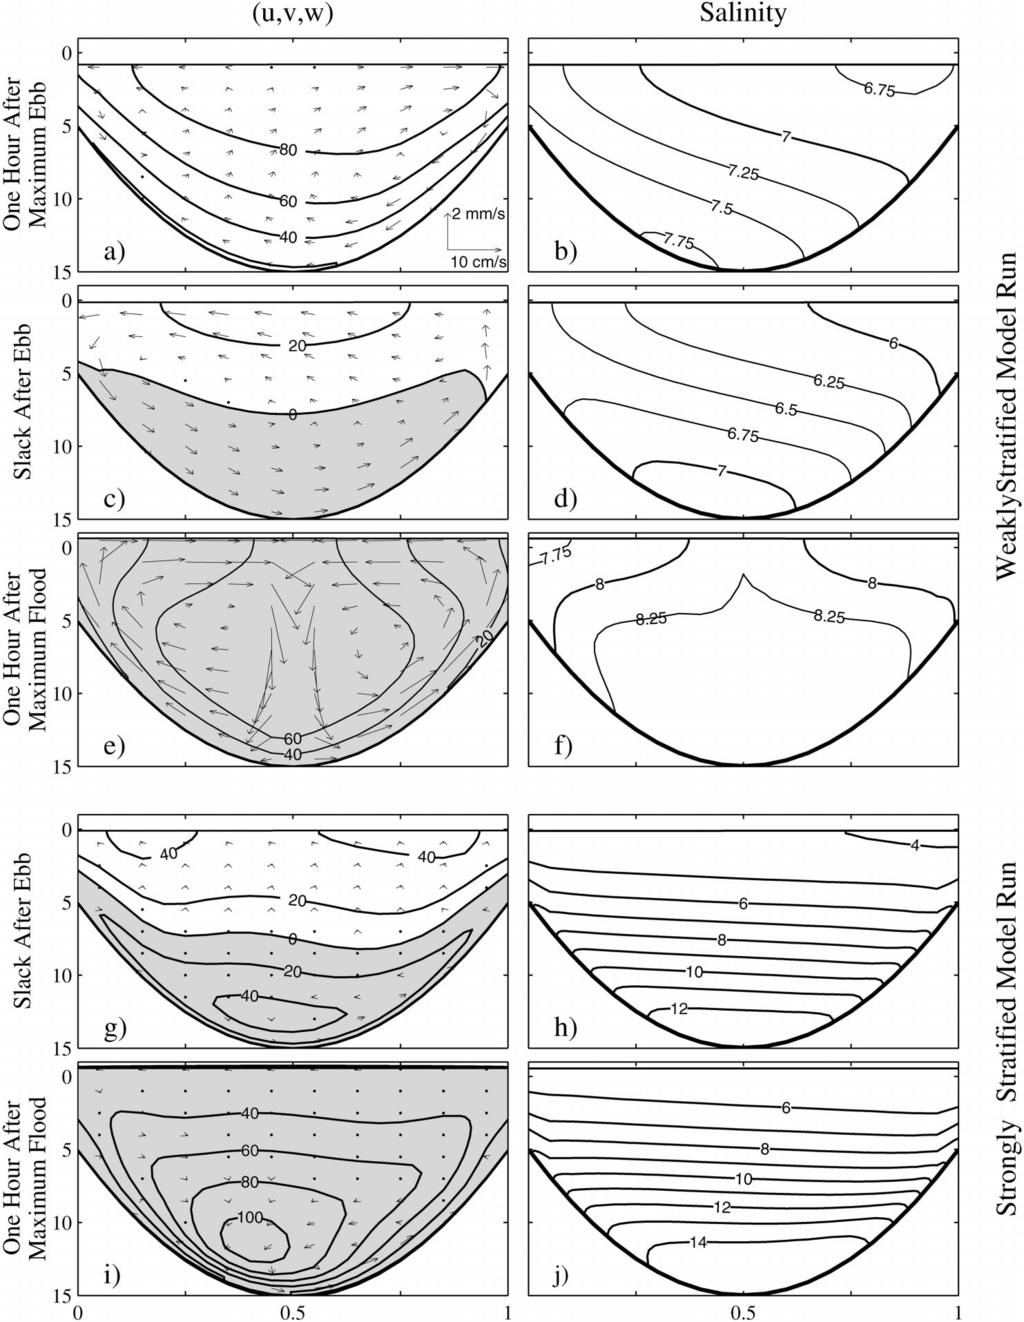 1420 JOURNAL OF PHYSICAL OCEANOGRAPHY FIG. 10. Similar to Fig. 5 but for model runs with rotation ( f 1 10 4 s 1 ).